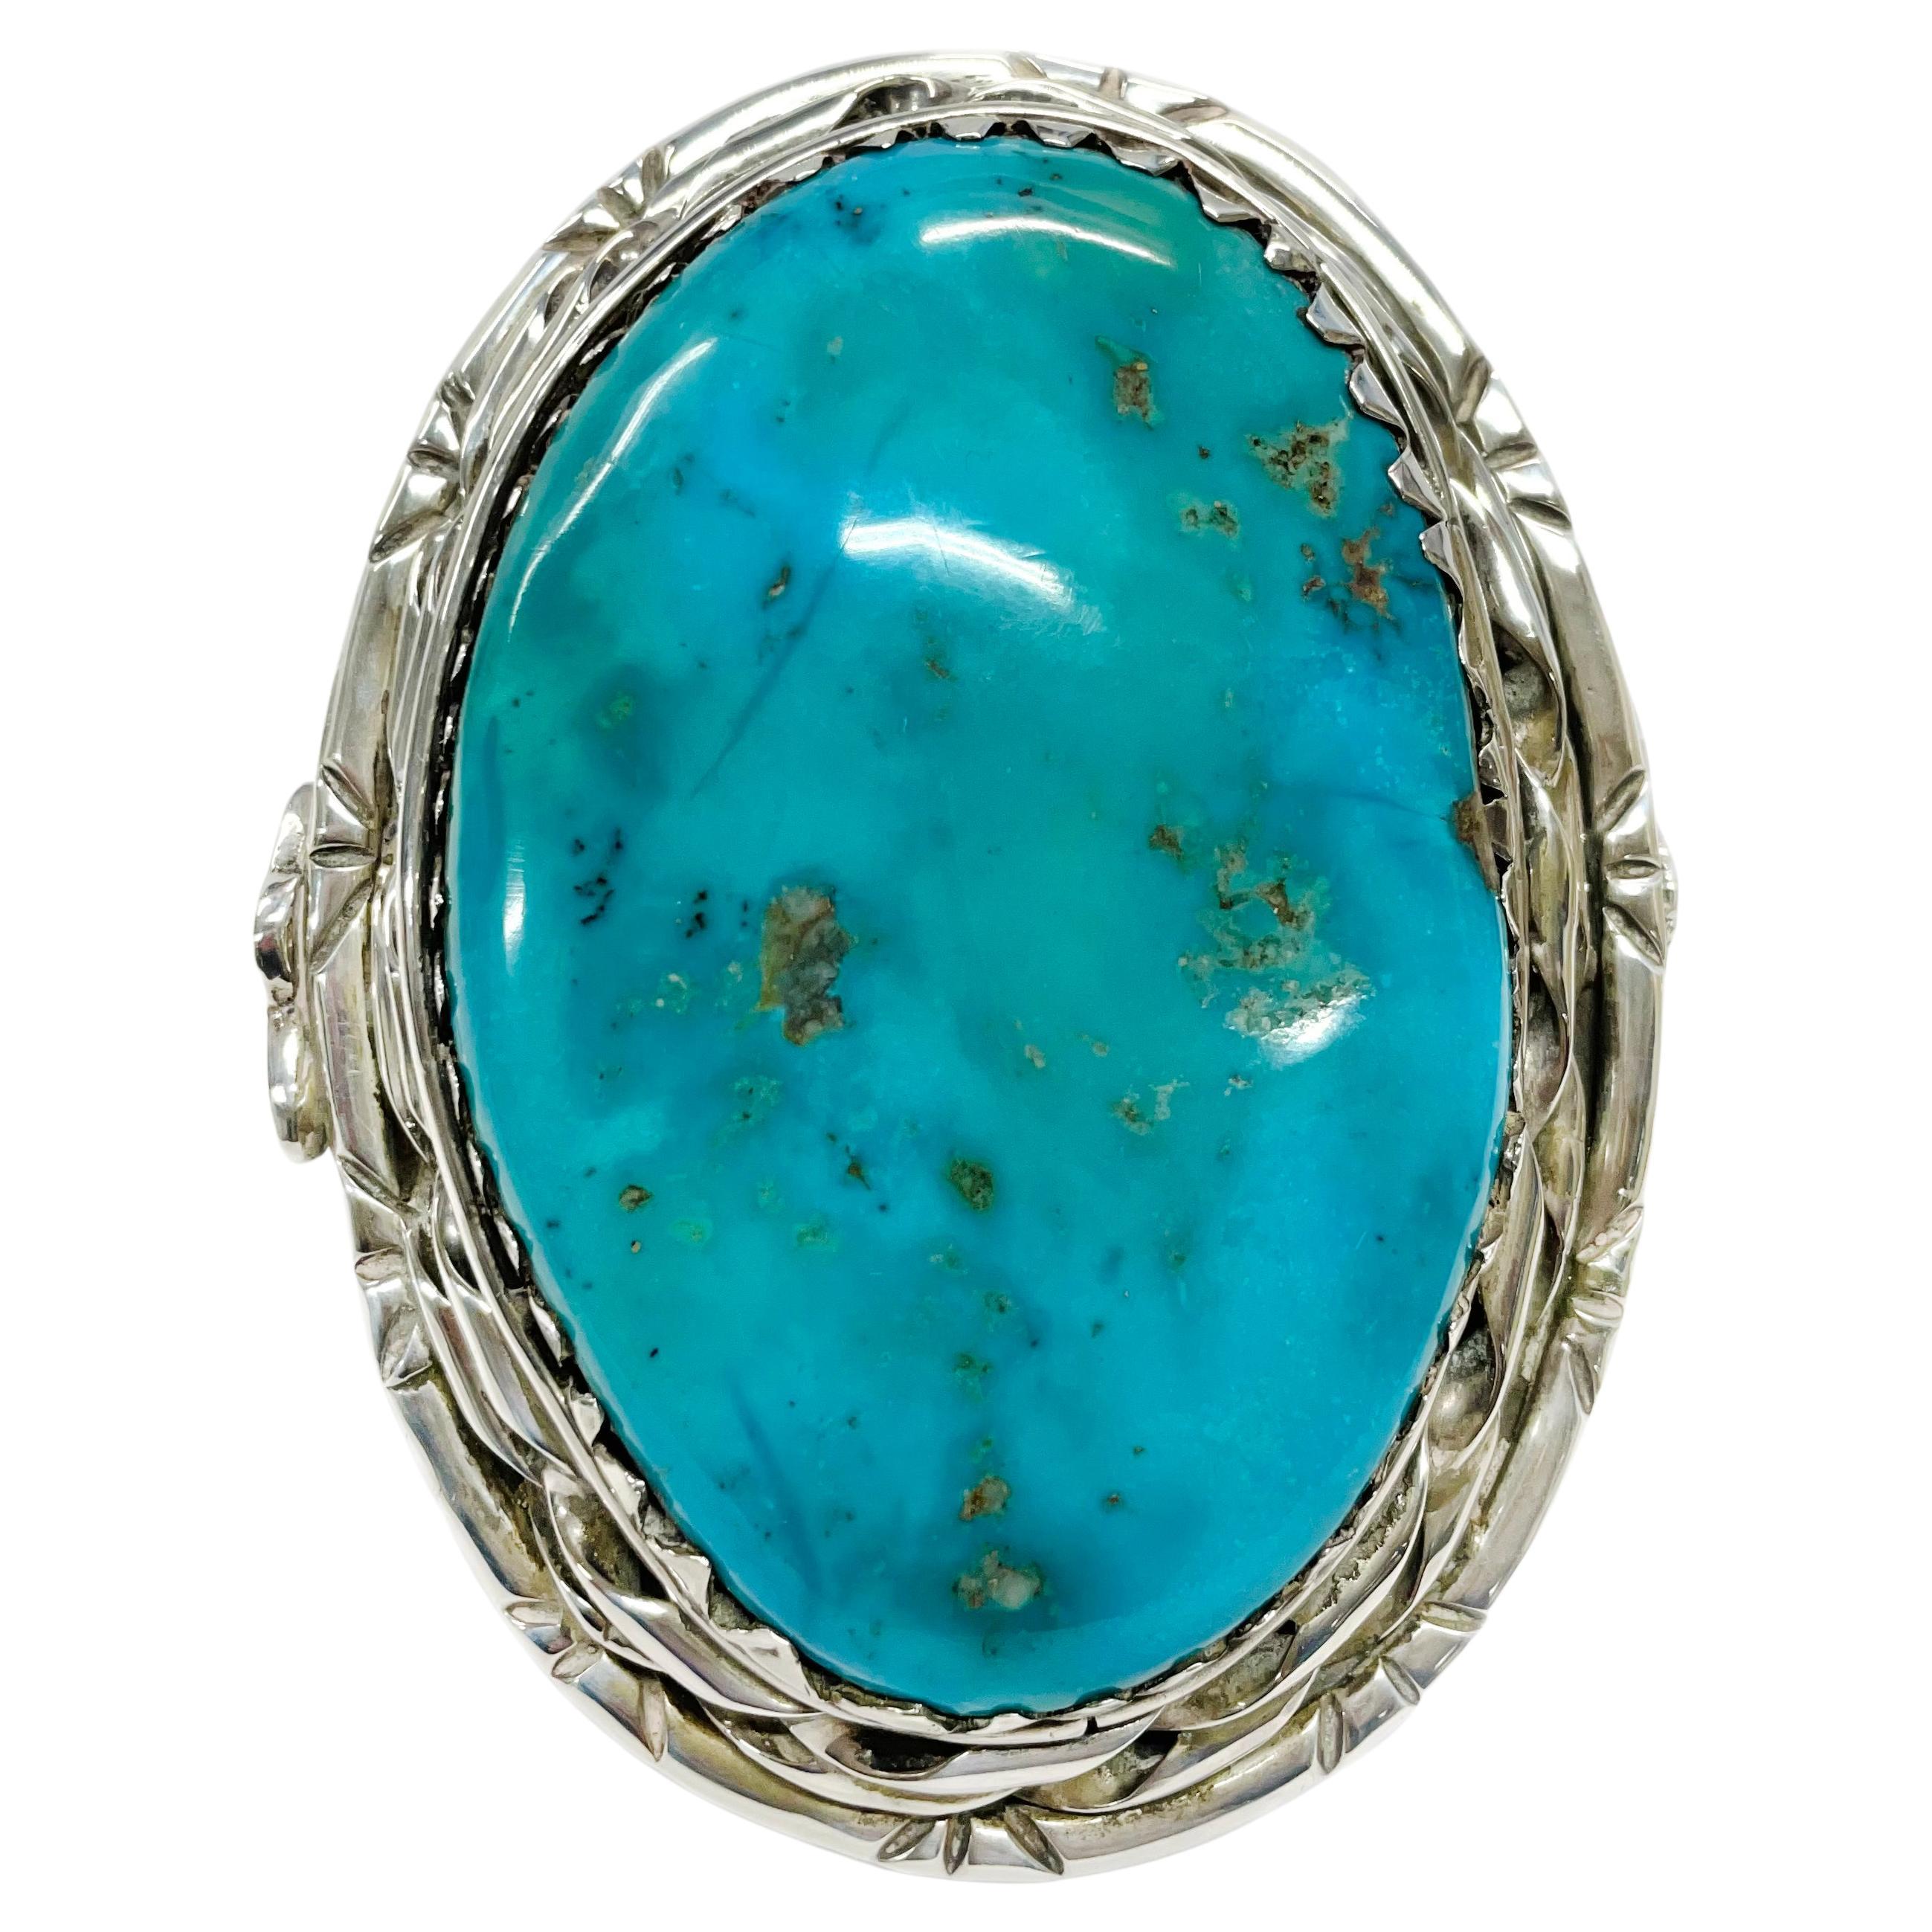 Handcrafted Sterling Silver cuff with an enormous 94mm x 63mm genuine turquoise stone. The stone is from the Castle Dome mine in Arizona. A truly unique larger than life cuff bracelet with a turquoise and carnelian thunderbird design on each side